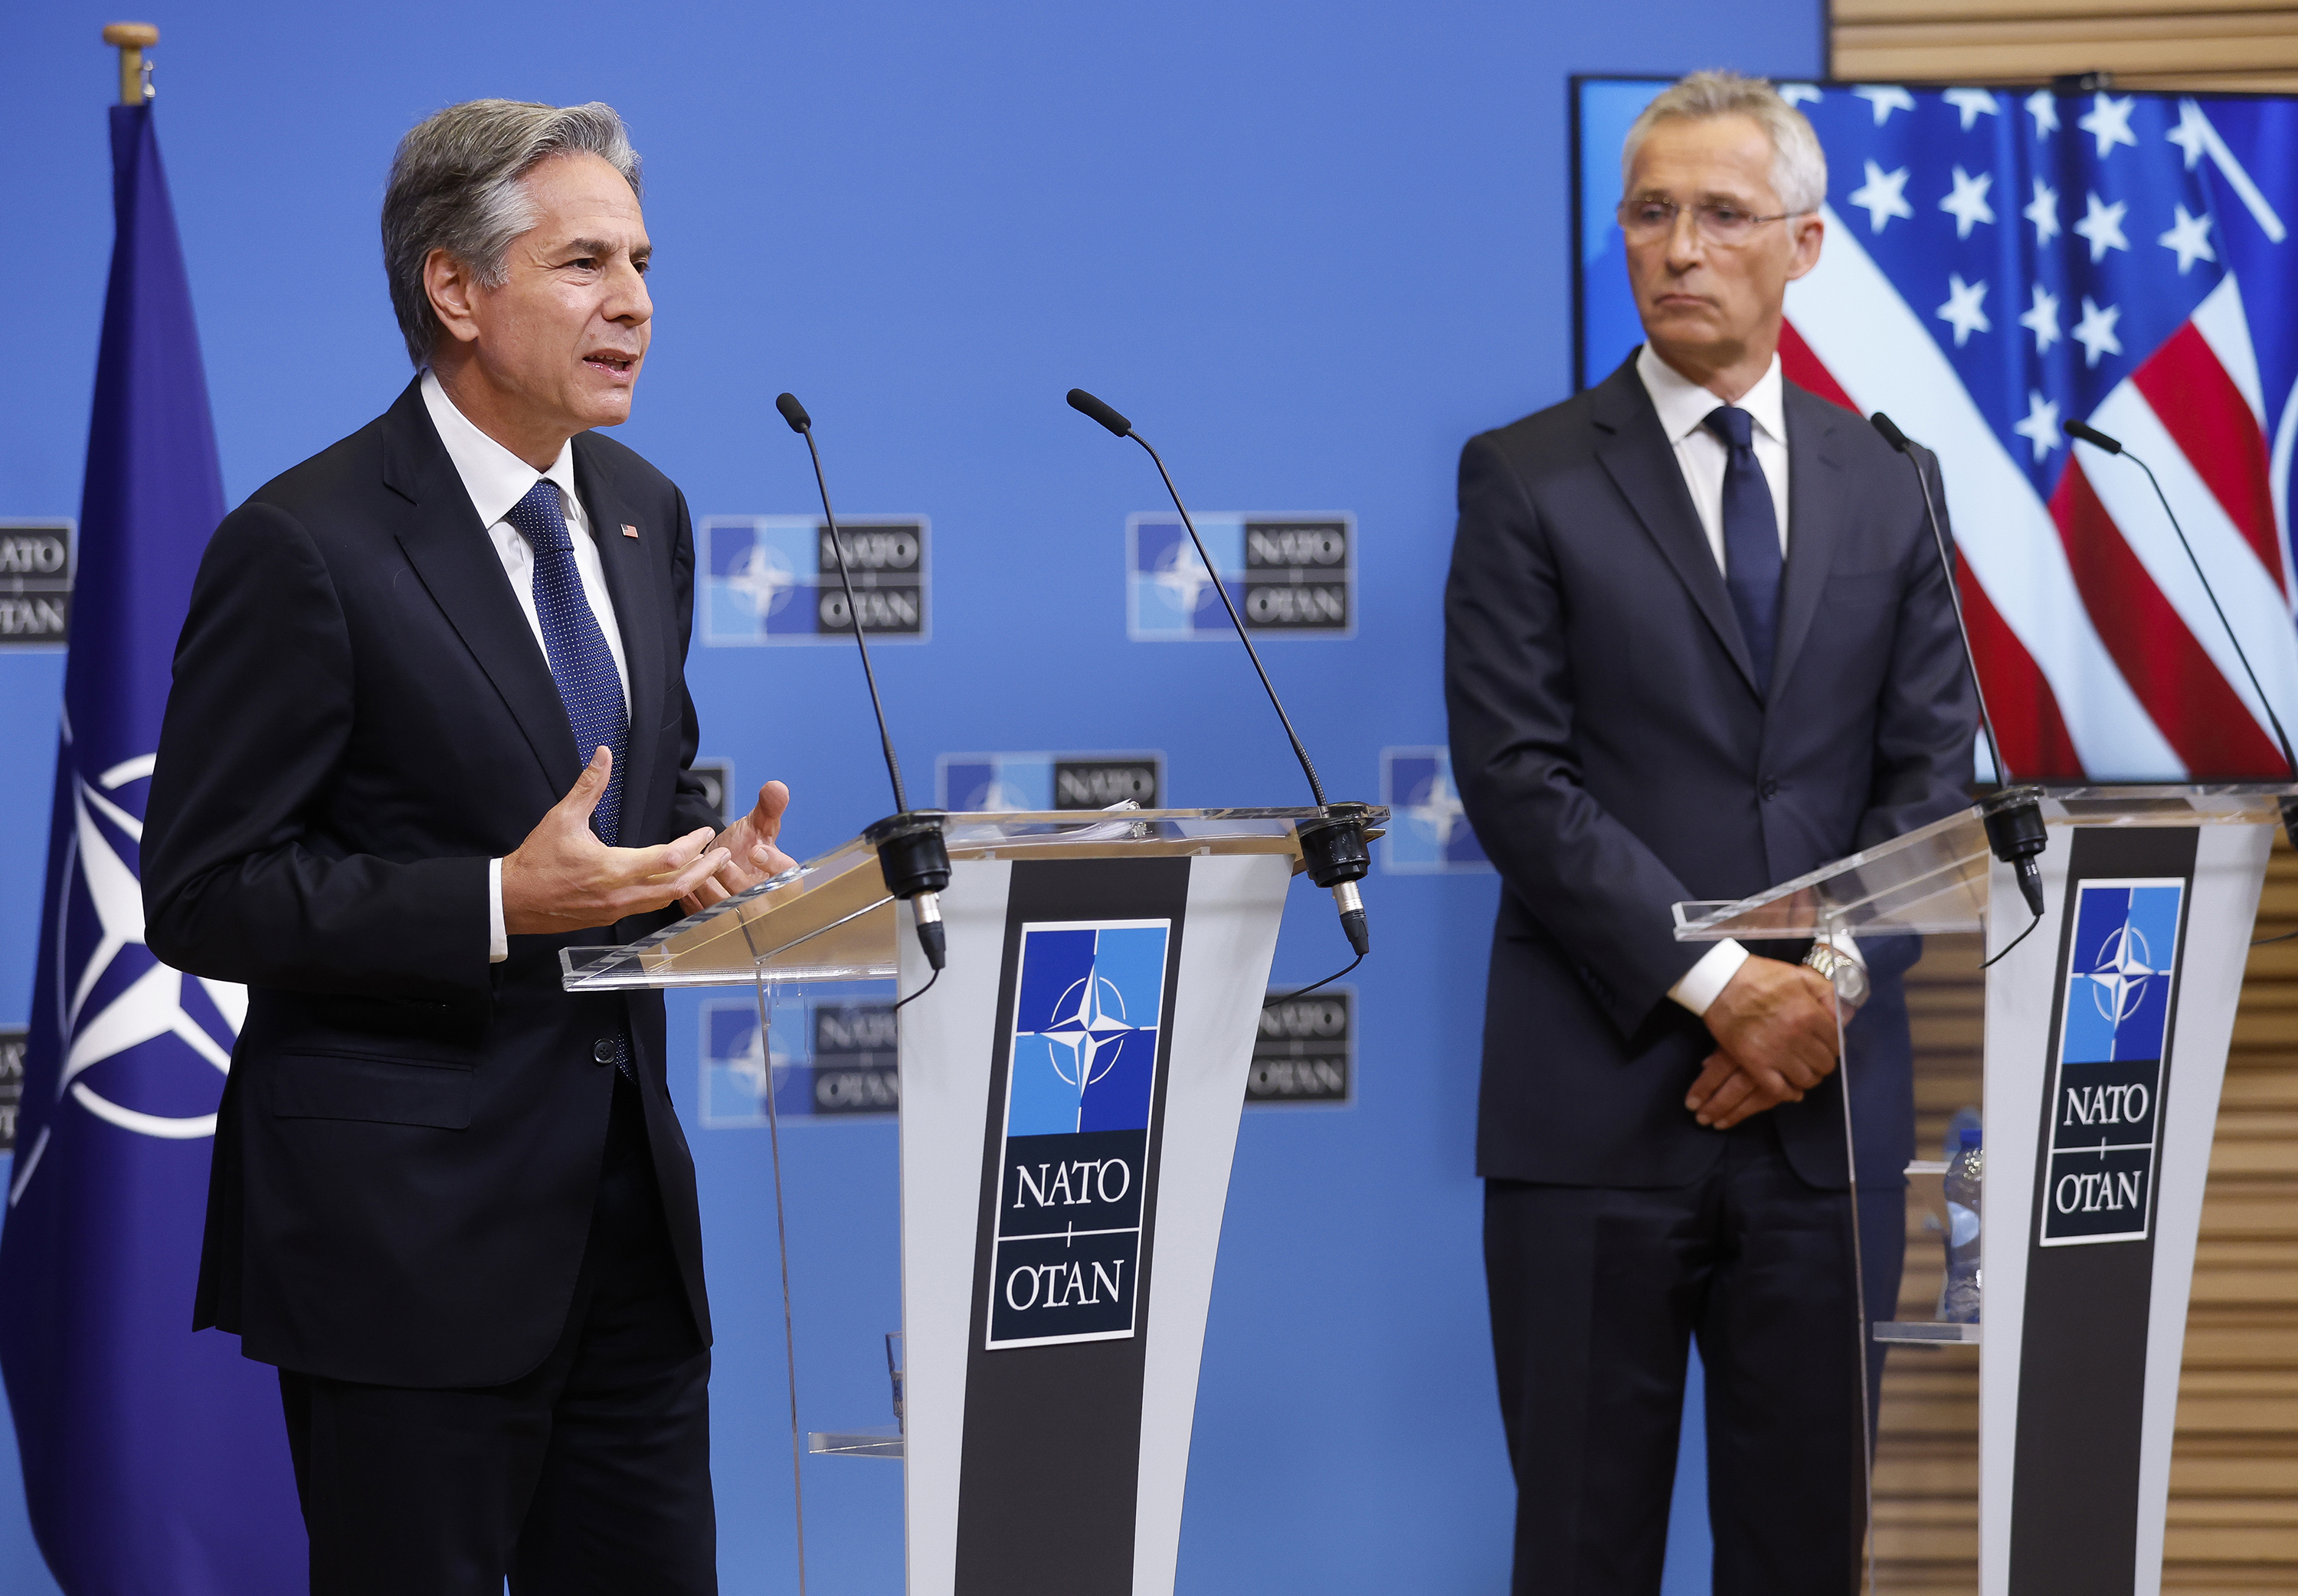 US Secretary of State Antony Blinken, left, and NATO Secretary General Jens Stoltenberg participate in a media conference after a meeting of NATO ambassadors at NATO headquarters in Brussels, Friday, on September 9.